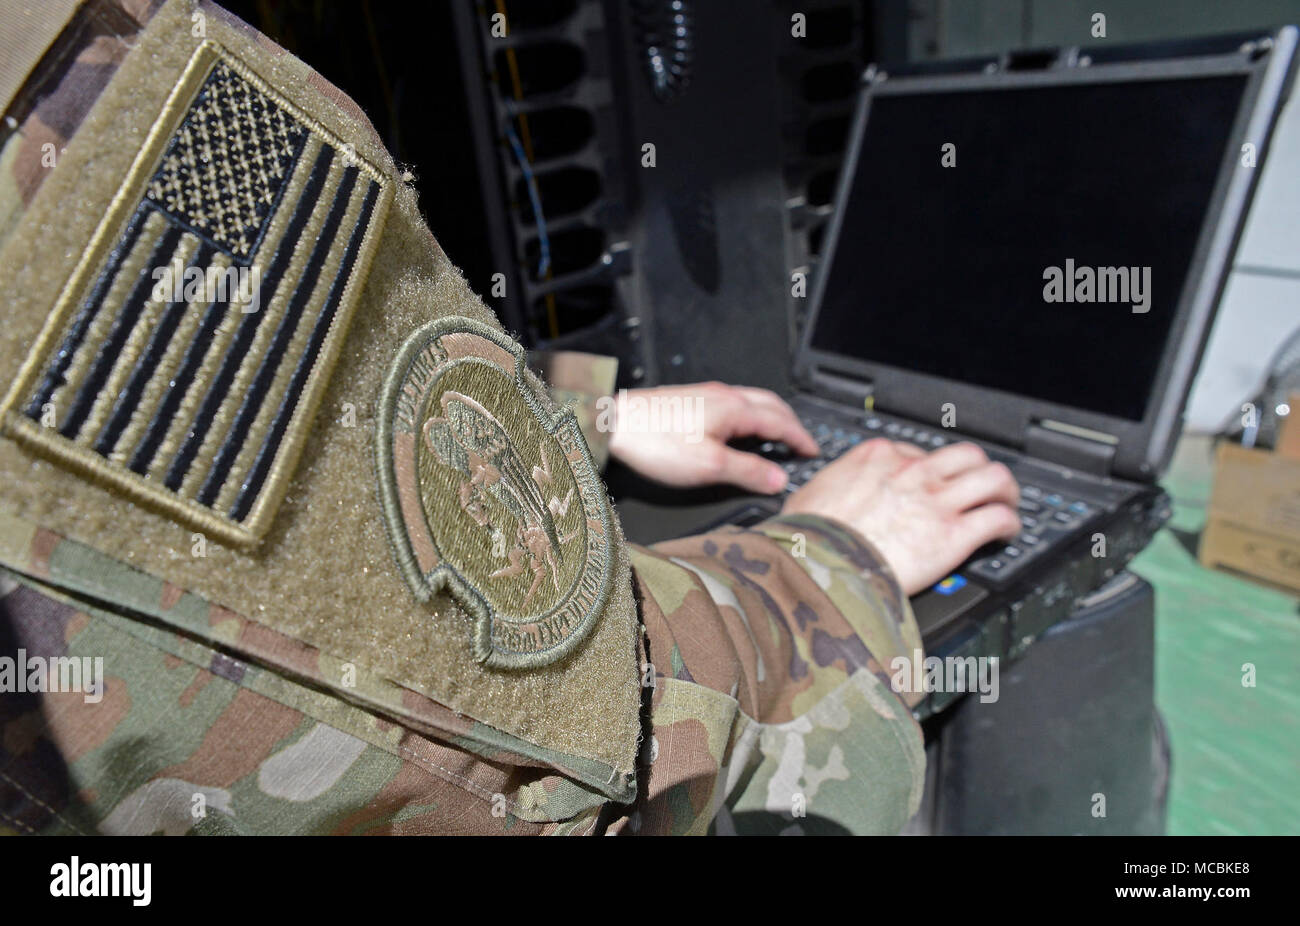 Staff Sgt. Brandon Hasegawa, 455th Expeditionary Communication Squadron cyber transport technician, activates a network port Mar. 22, 2018 at Bagram Airfield, Afghanistan. In addition to maintaining and managing the network, Hasegawa stays busy dealing with vulnerability issue, testing and troubleshooting network systems equipment as well as port activations. Stock Photo